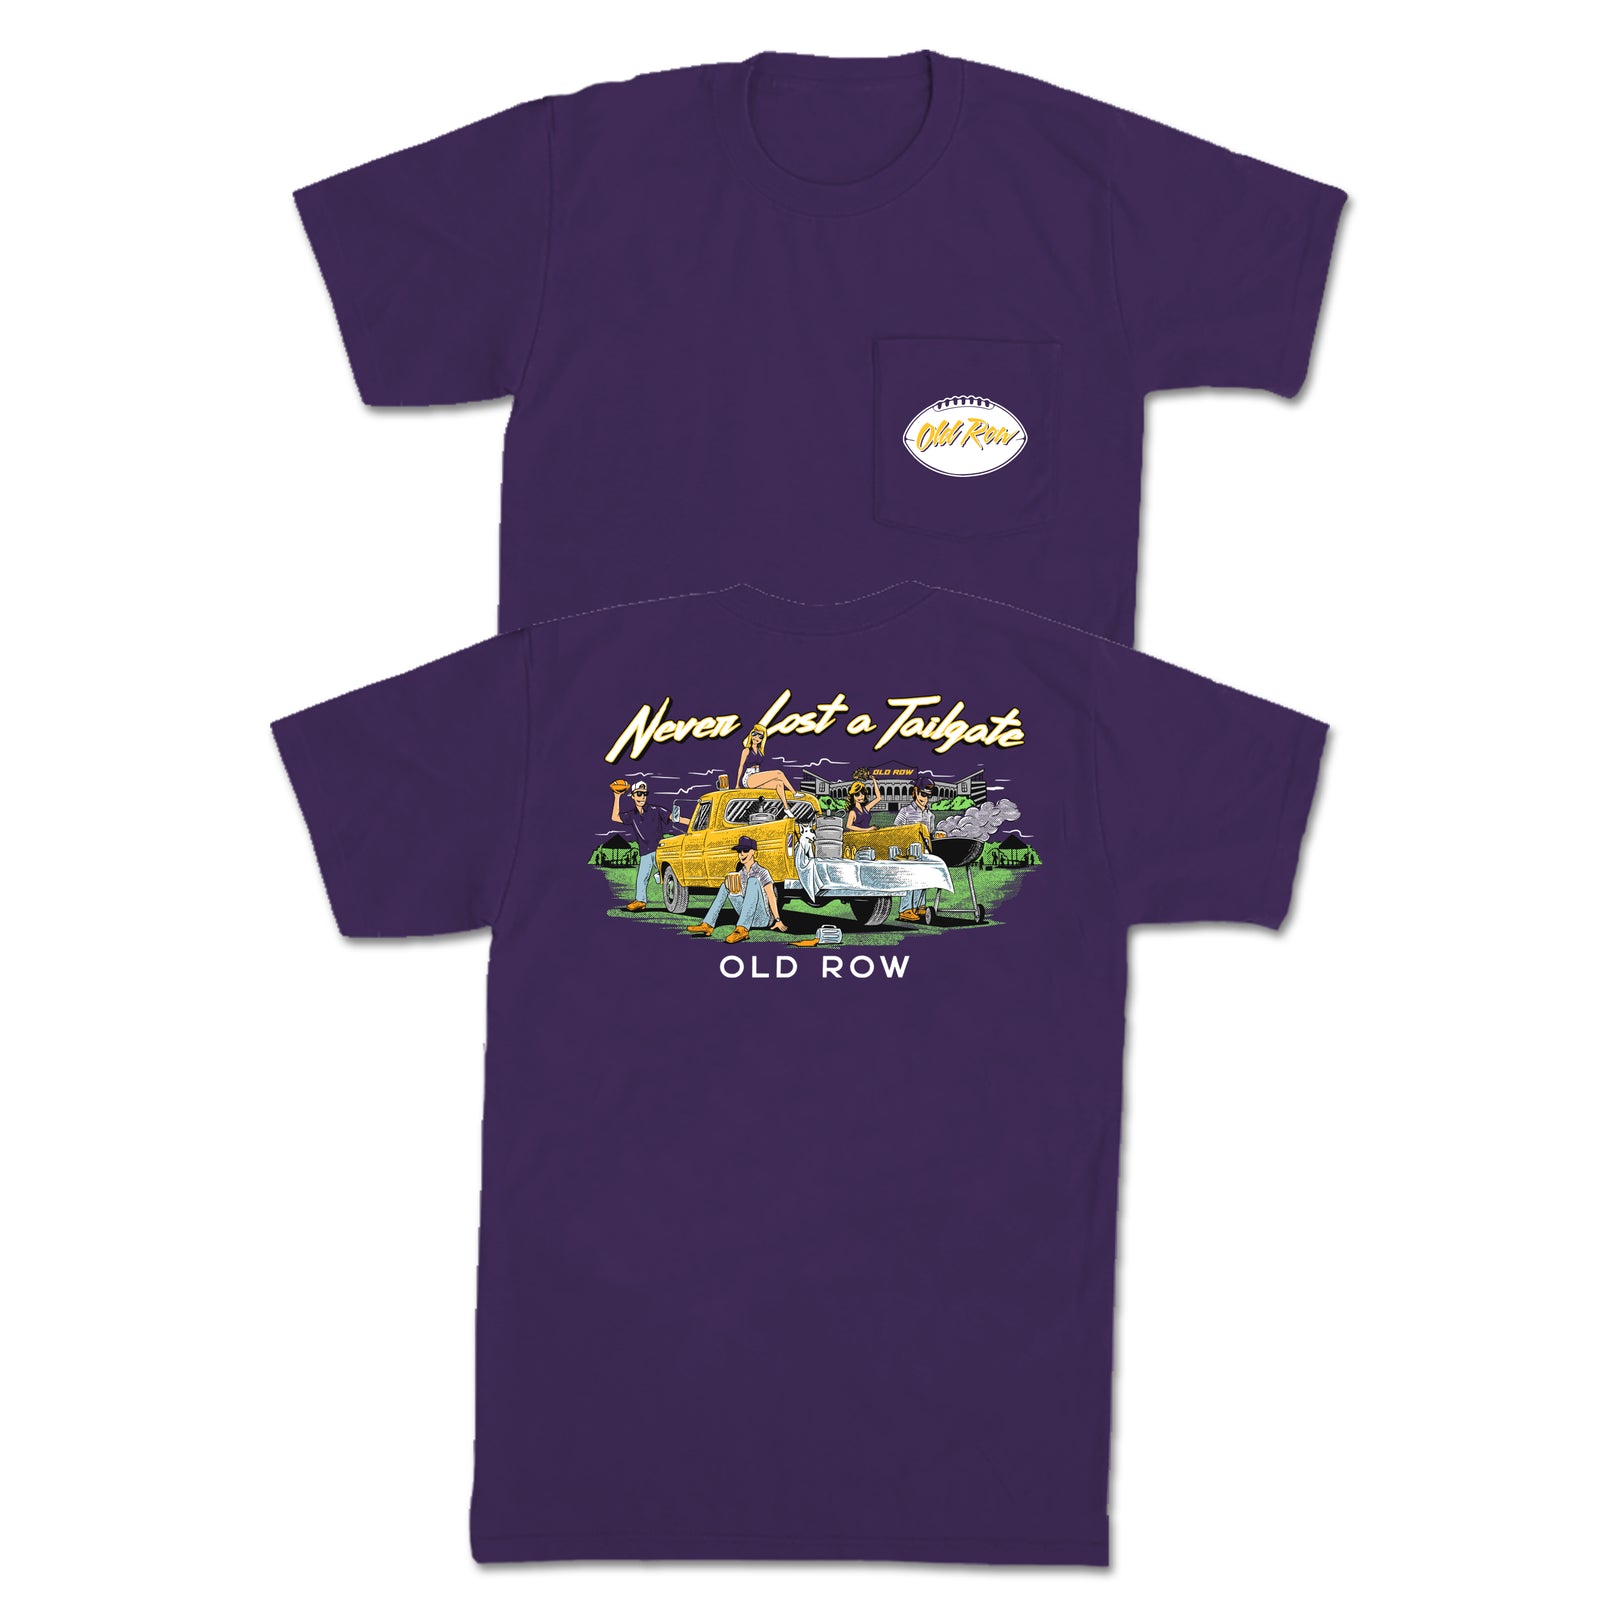 Never Lost A Tailgate Baton Rouge Pocket Tee